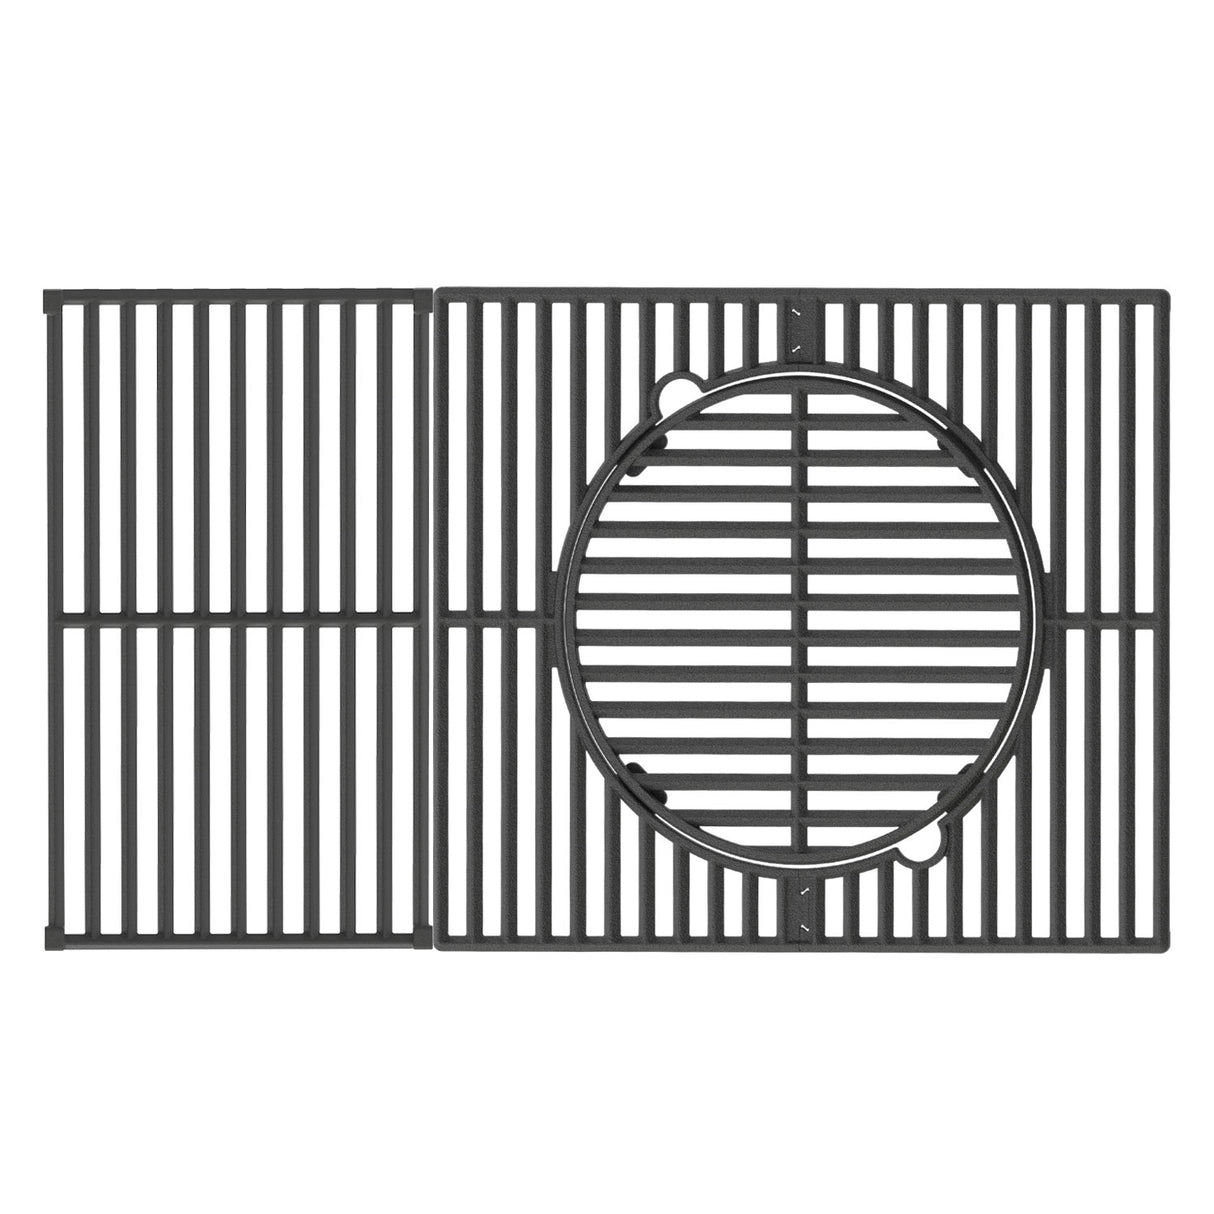 Multifunction Cast Iron Grill Grate for 4-Burner Grill (25392, Mesa 400)